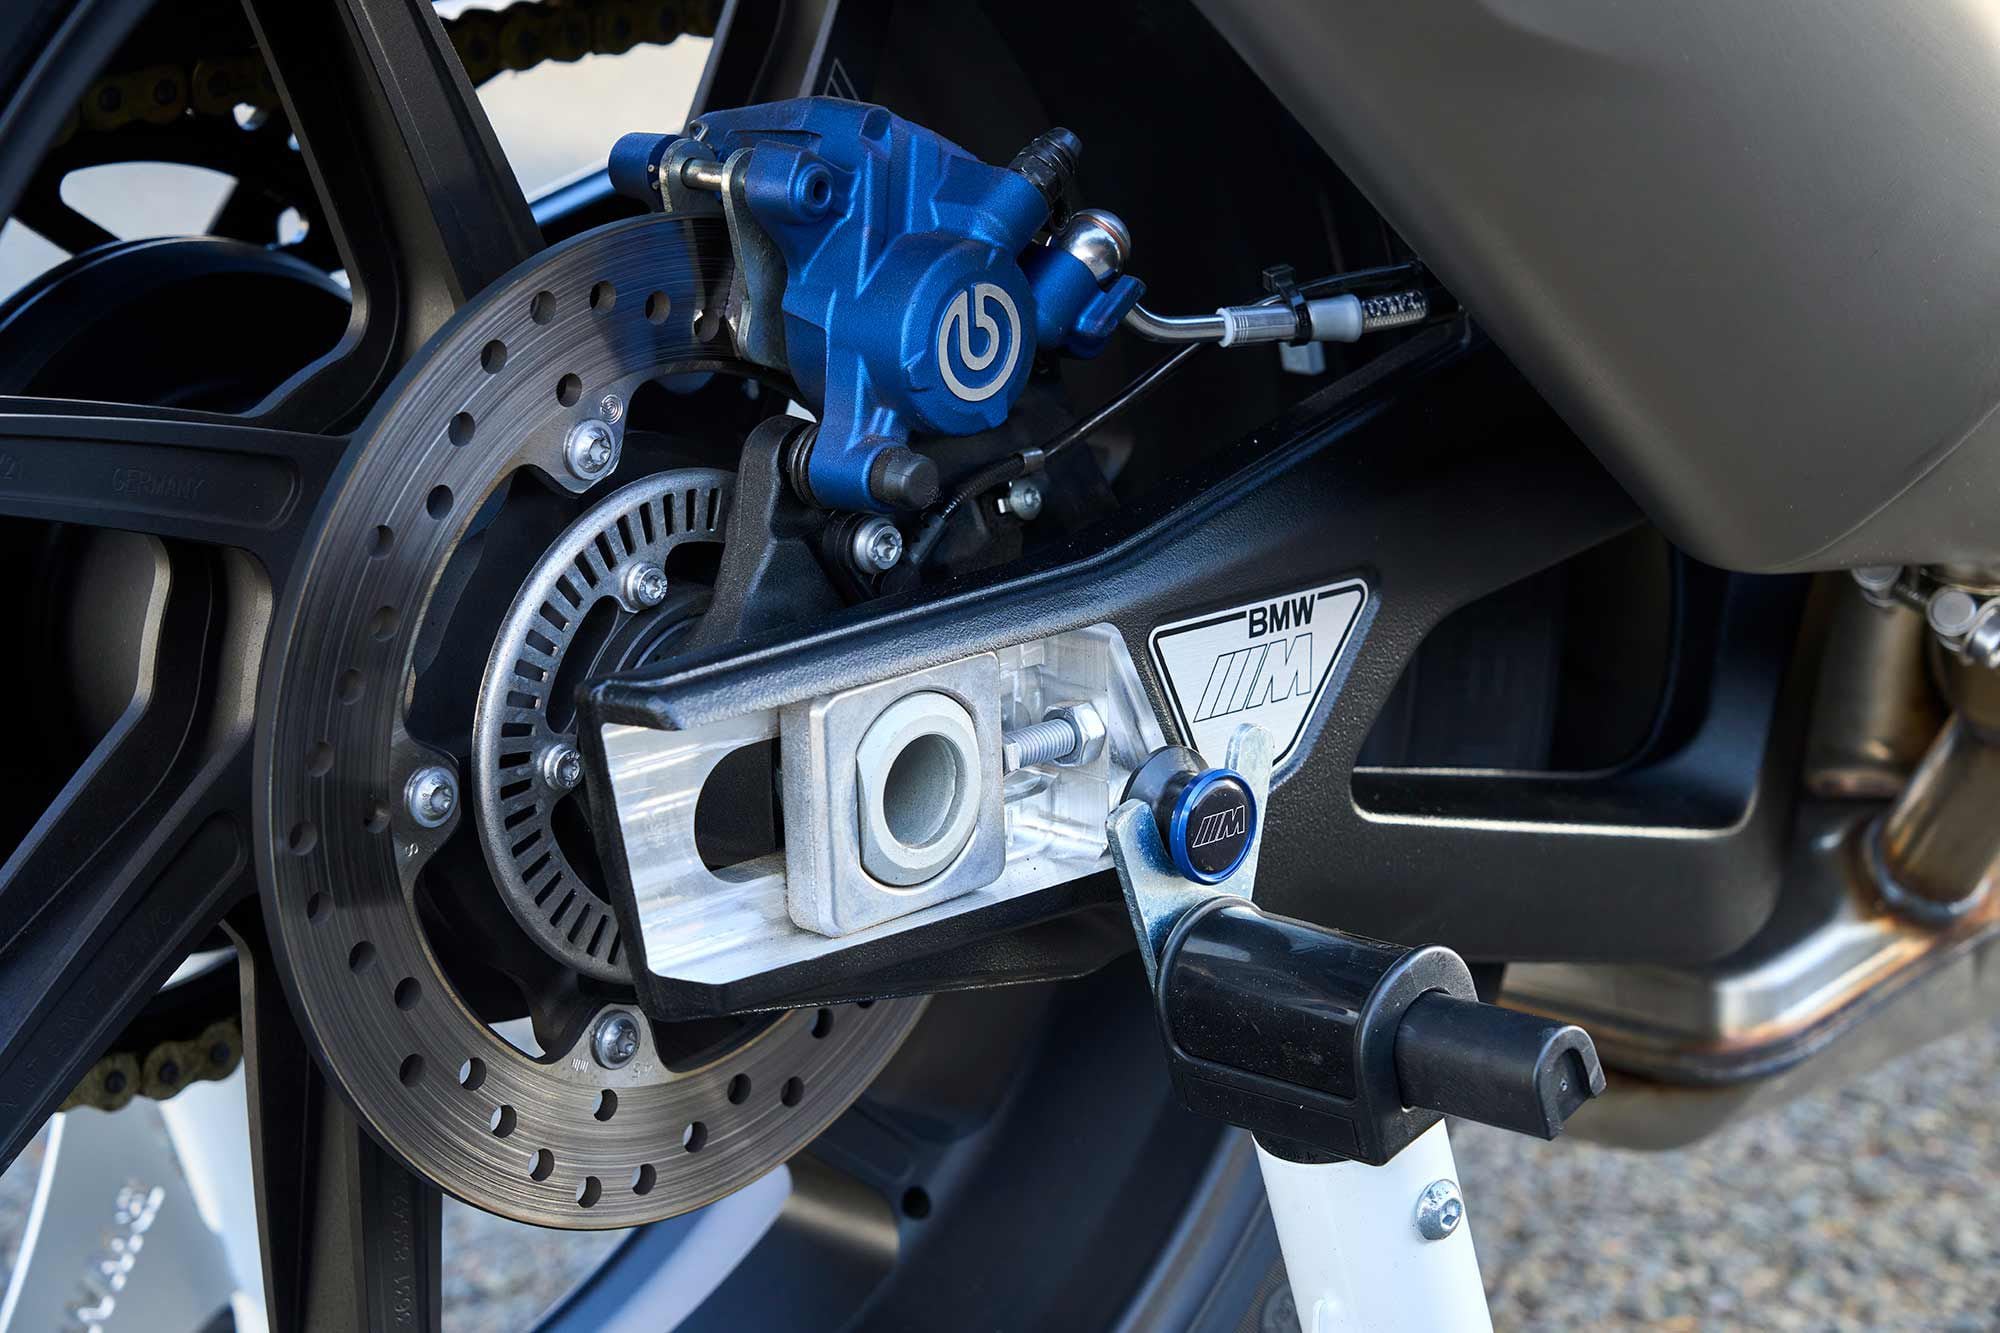 The M’s swingarm is virtually identical to that of its sibling, the S 1000 RR. A single-piston Brembo caliper and 220mm disc sit atop.